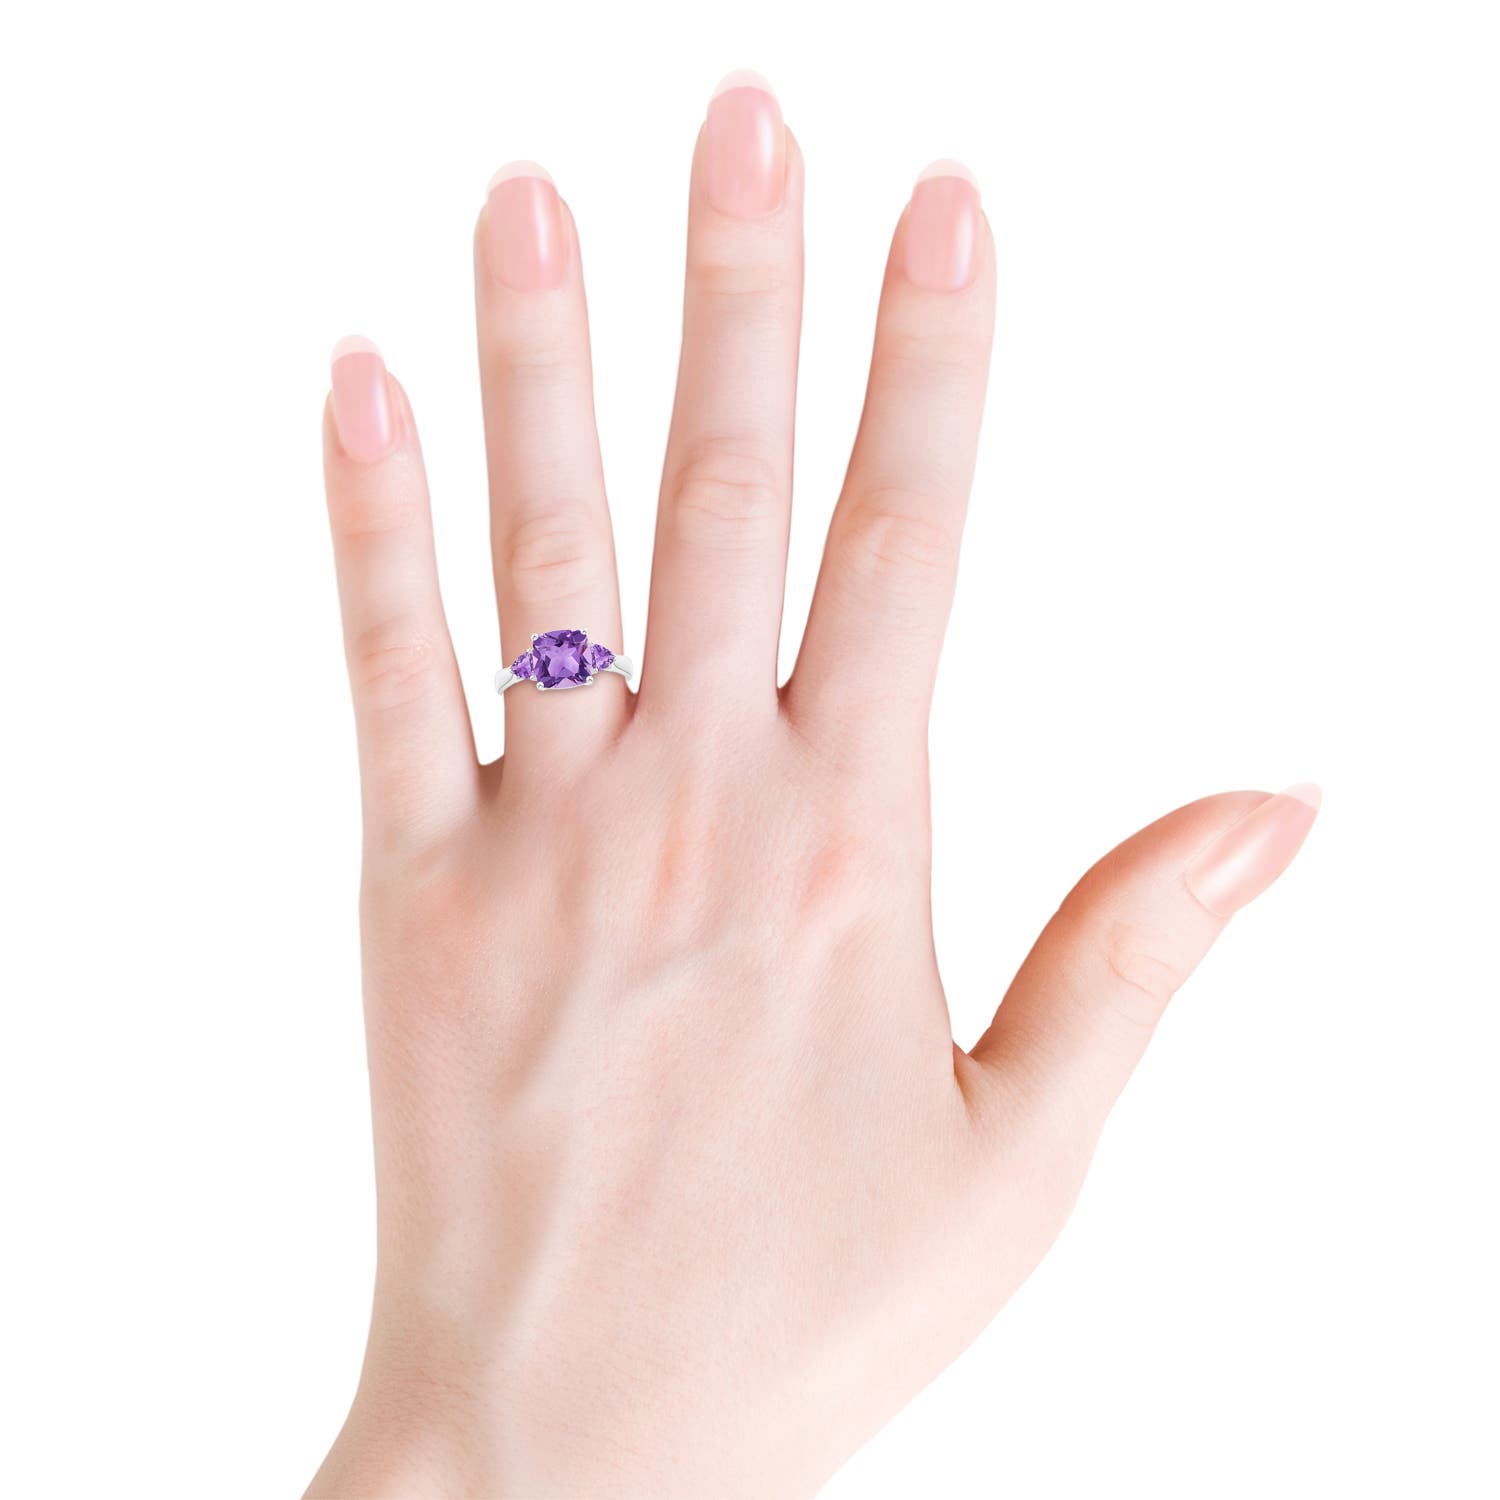 A - Amethyst / 2.6 CT / 14 KT White Gold